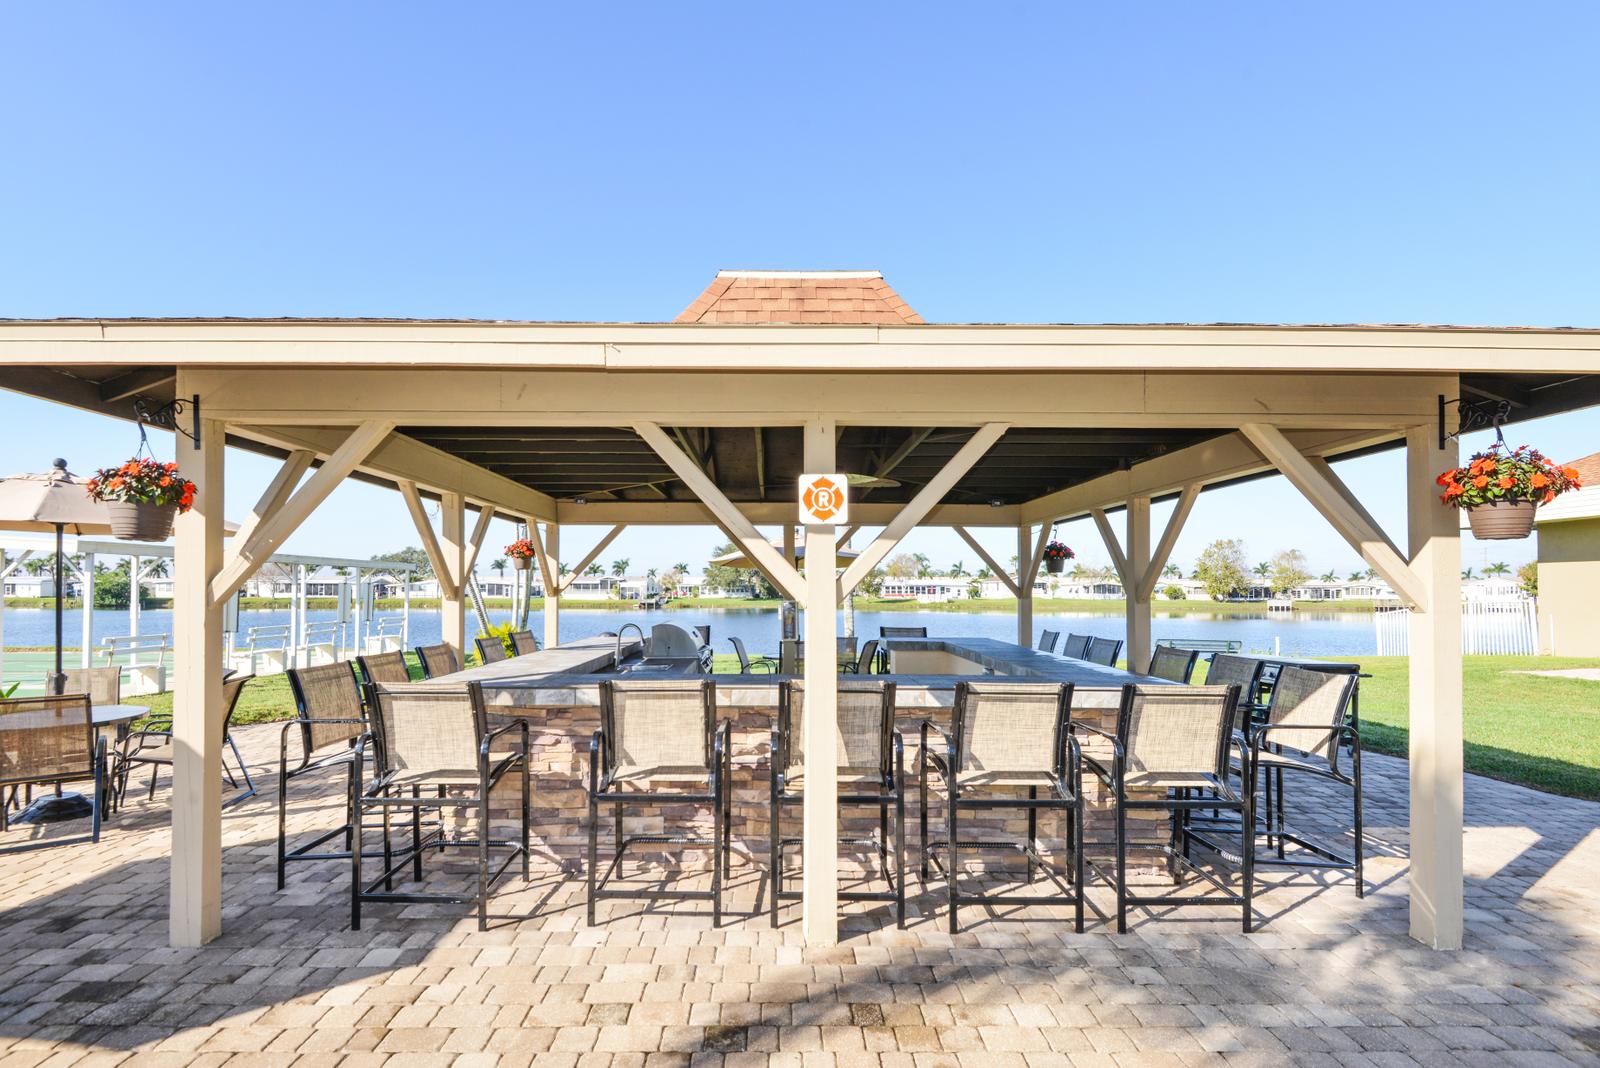 Large covered BBQ and patio area located outside off the lake.